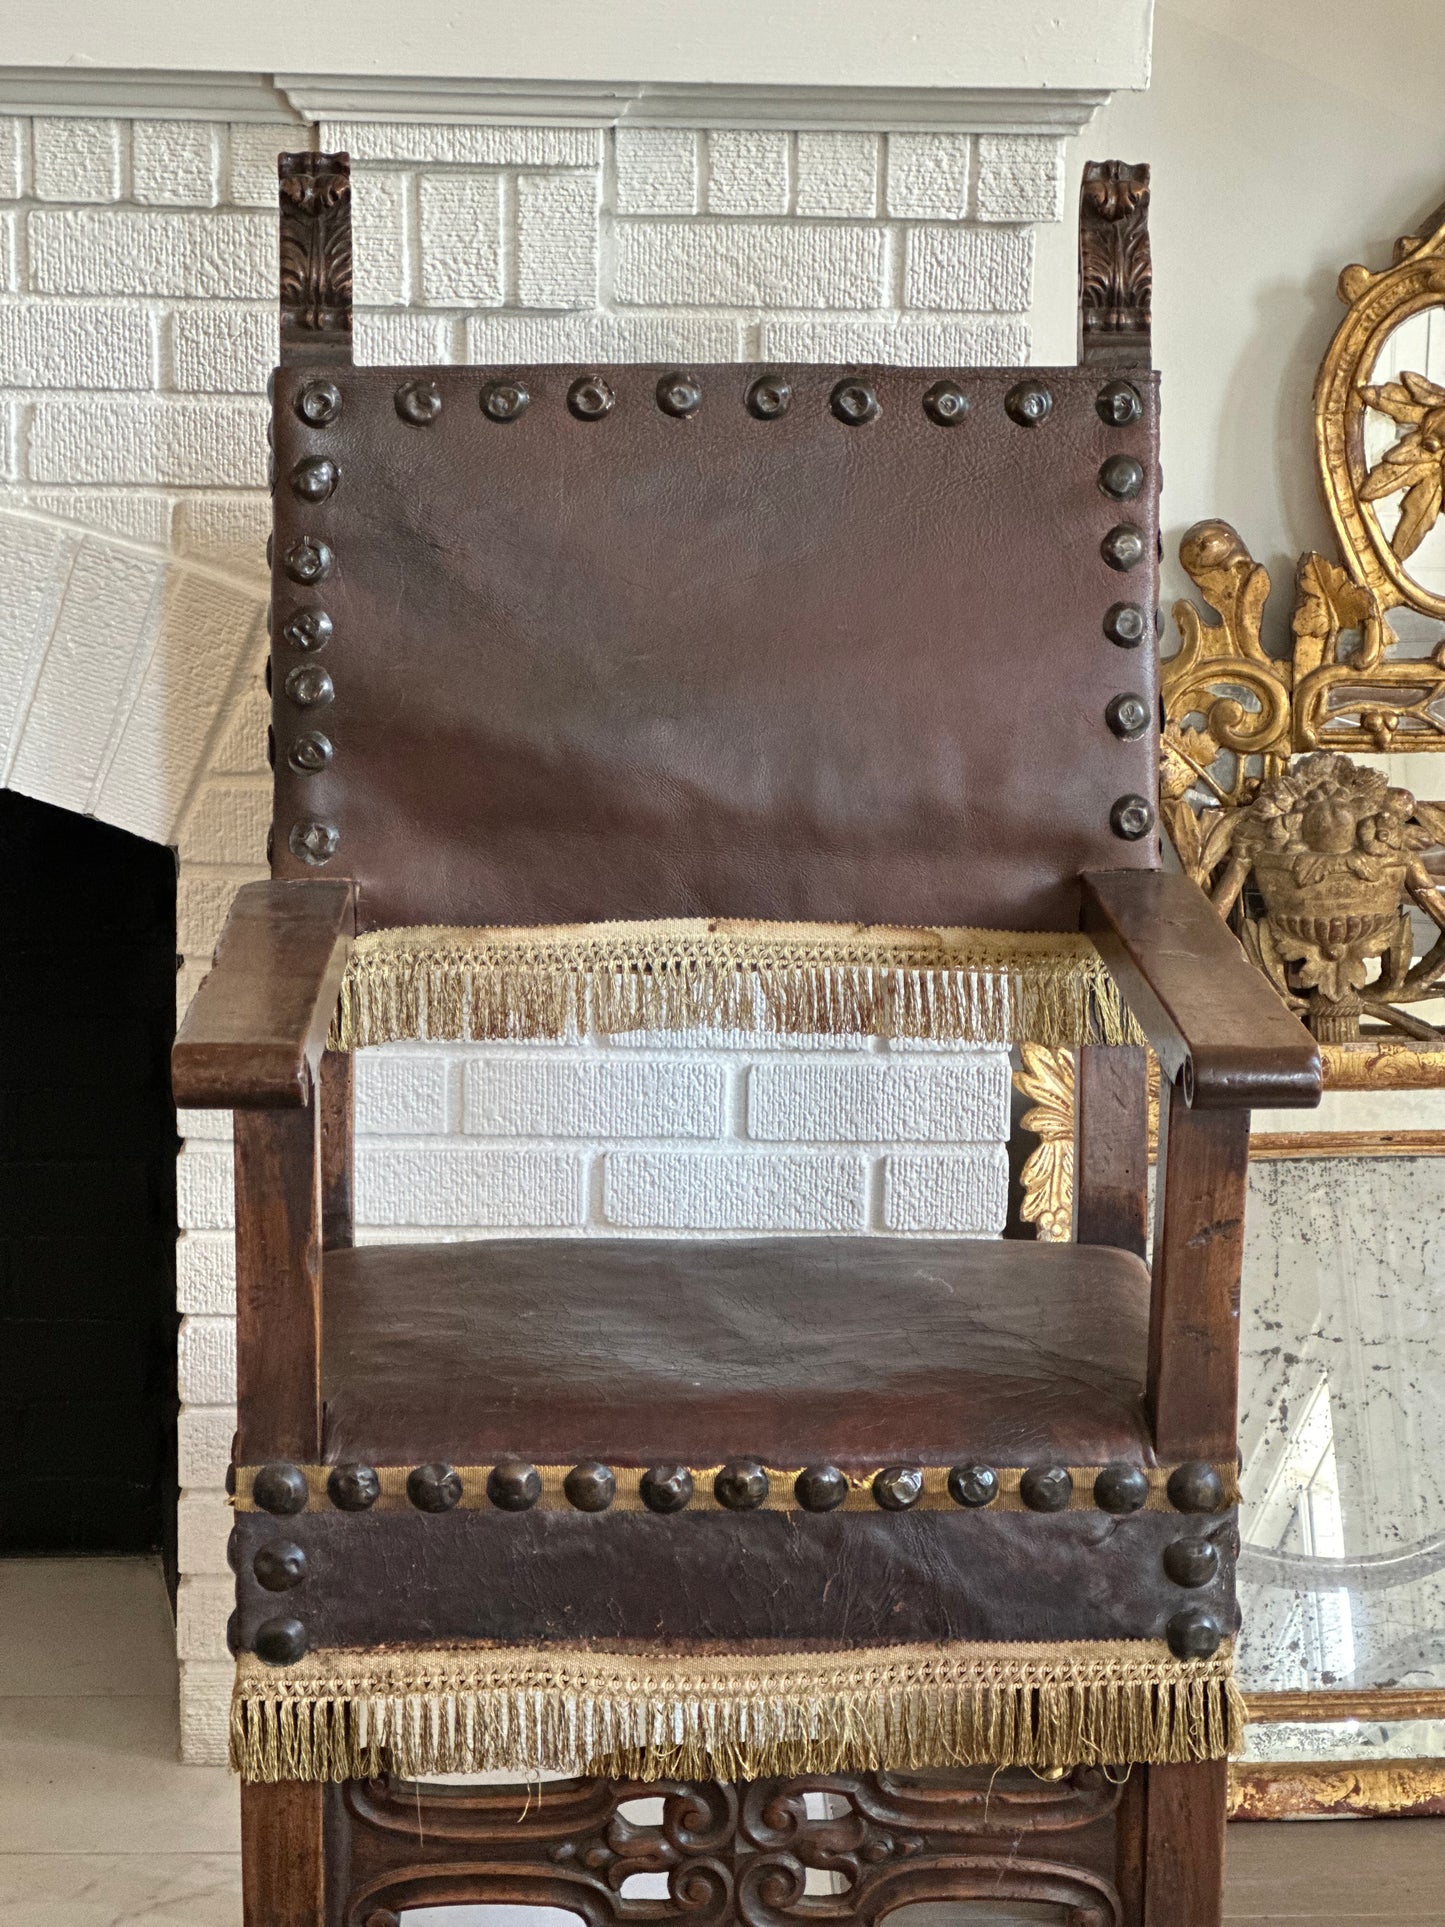 Italian Leather Chair with Fringe - 18th Century